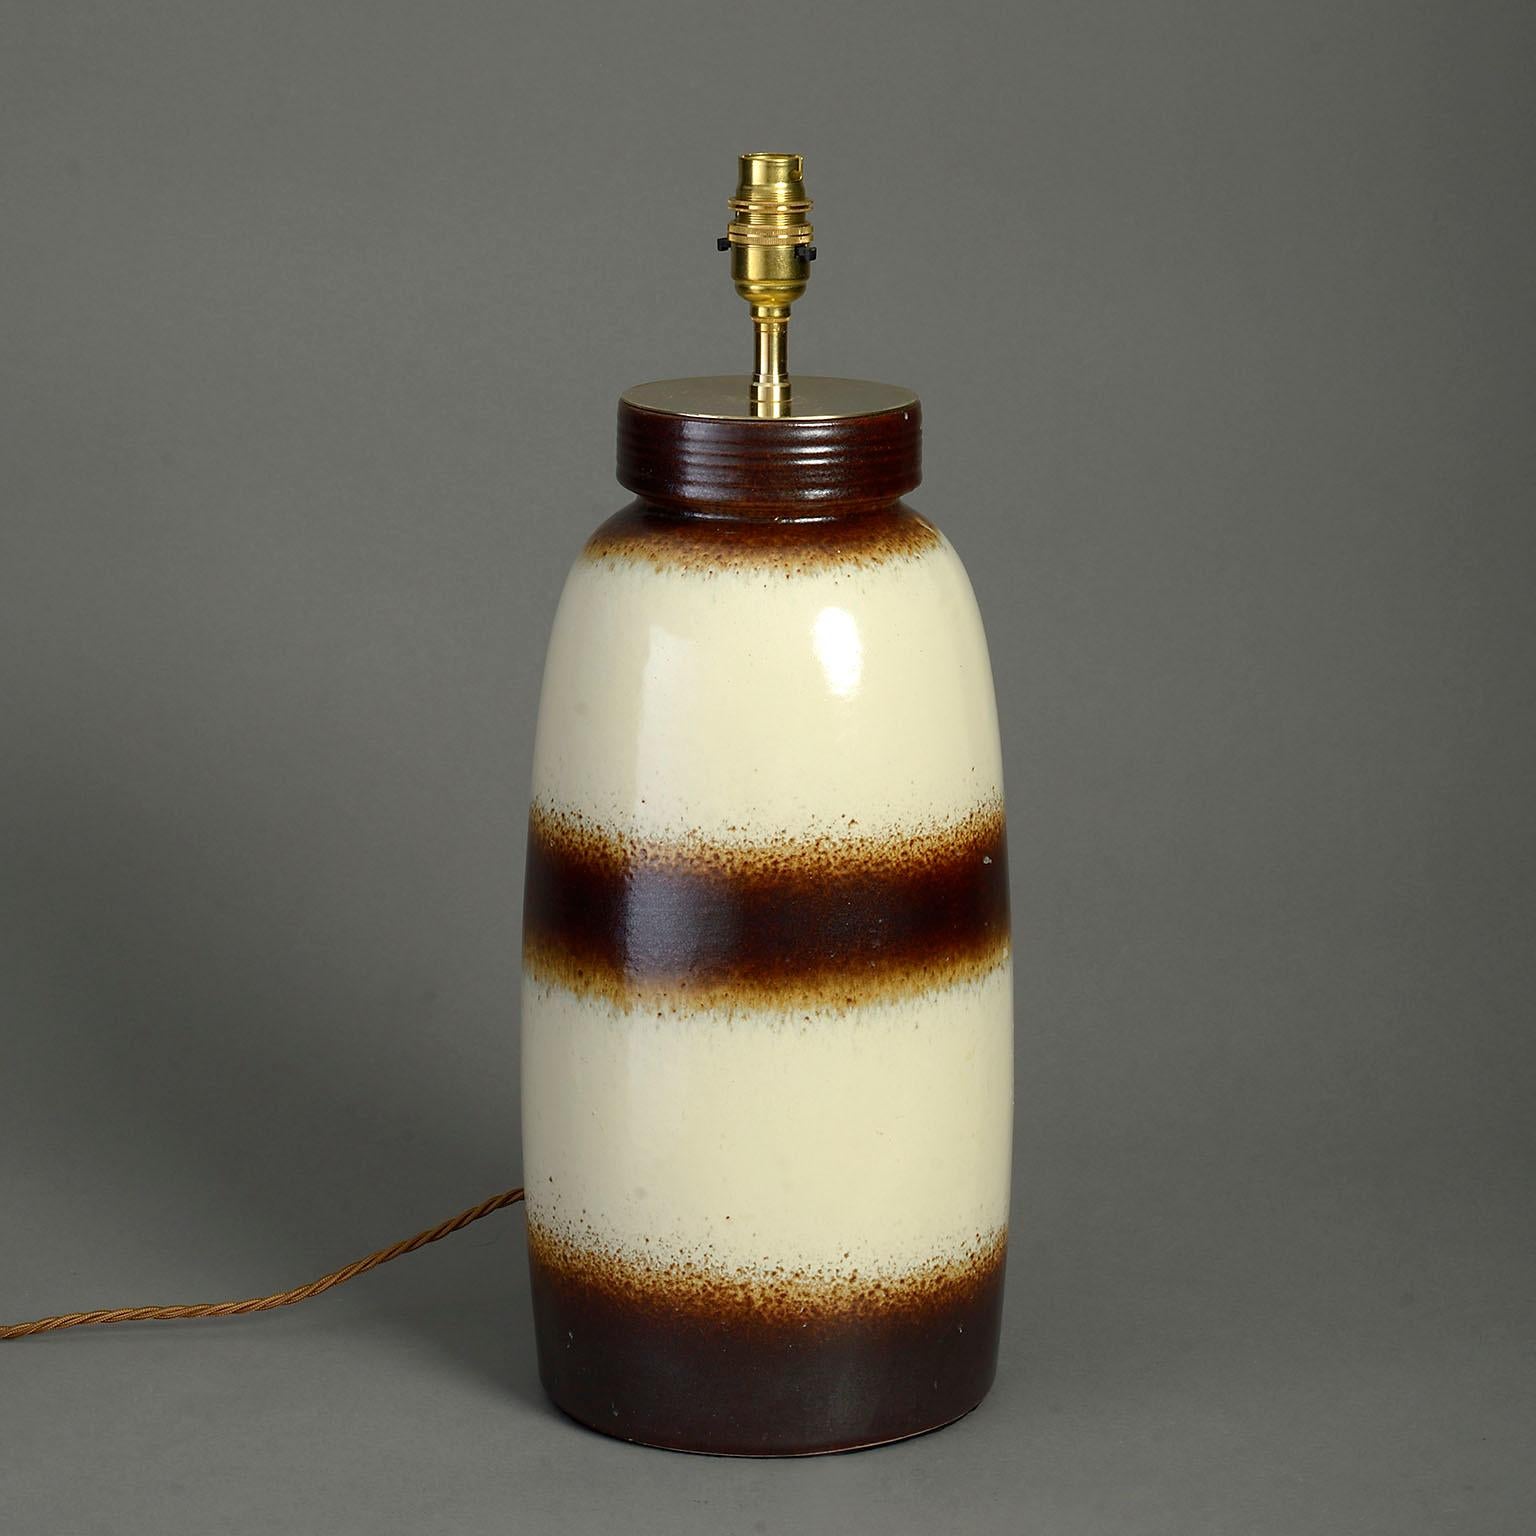 A mid-twentieth century pottery art vase lamp, the body with chocolate glazed bands upon a cream ground.

Dimensions refer to ceramic elements only.

Wired to UK standards. Can be rewired to all International specifications inclusive.

Shade